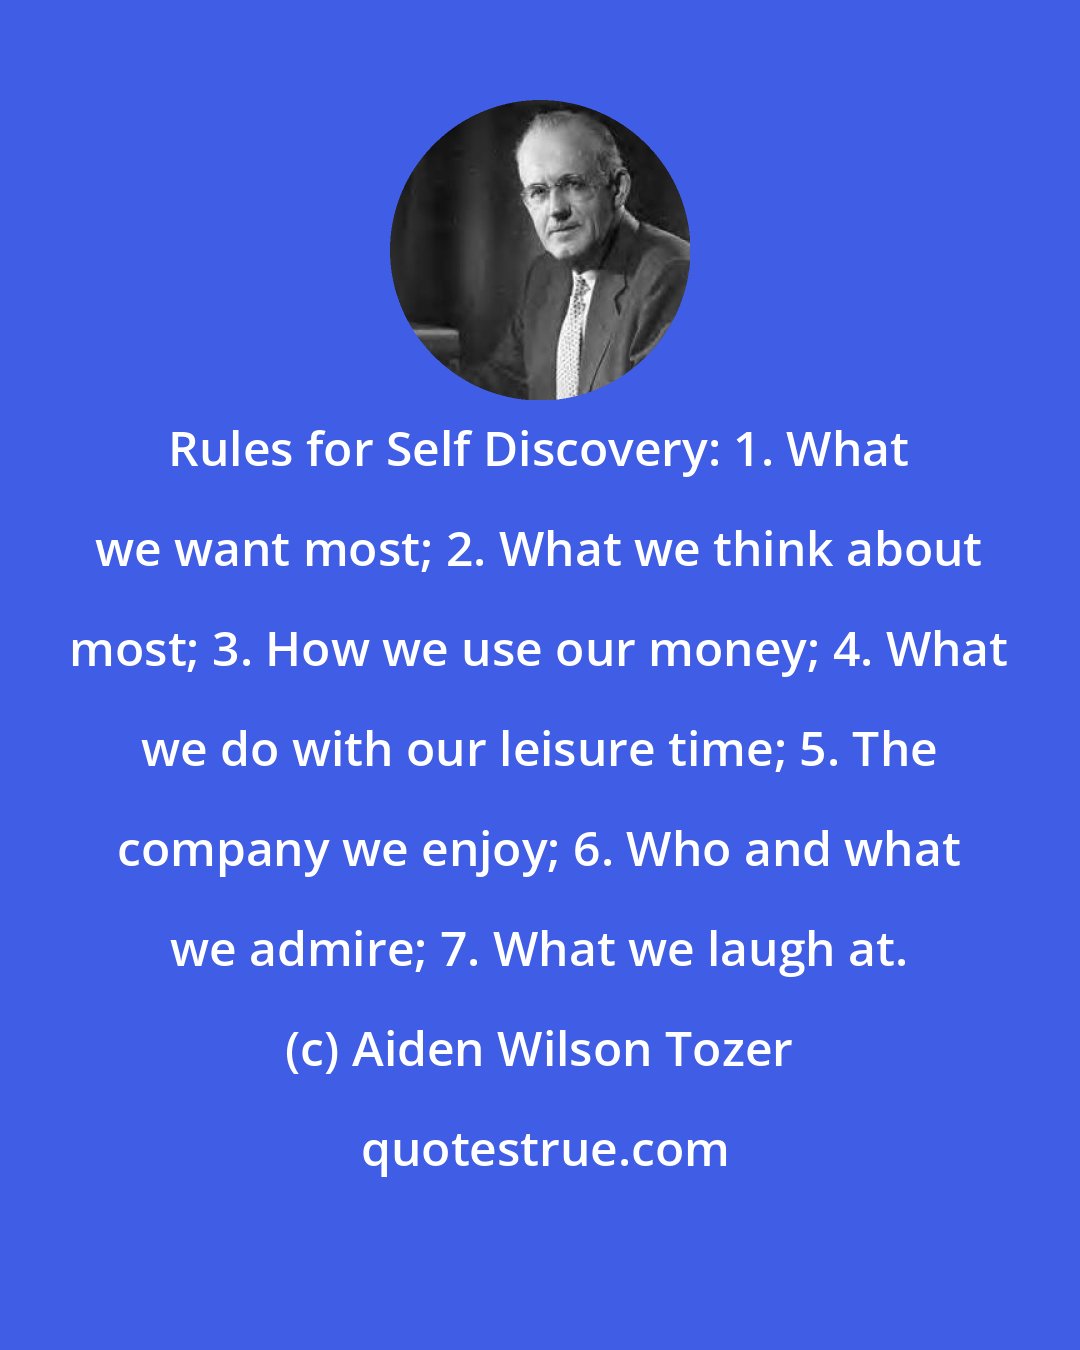 Aiden Wilson Tozer: Rules for Self Discovery: 1. What we want most; 2. What we think about most; 3. How we use our money; 4. What we do with our leisure time; 5. The company we enjoy; 6. Who and what we admire; 7. What we laugh at.